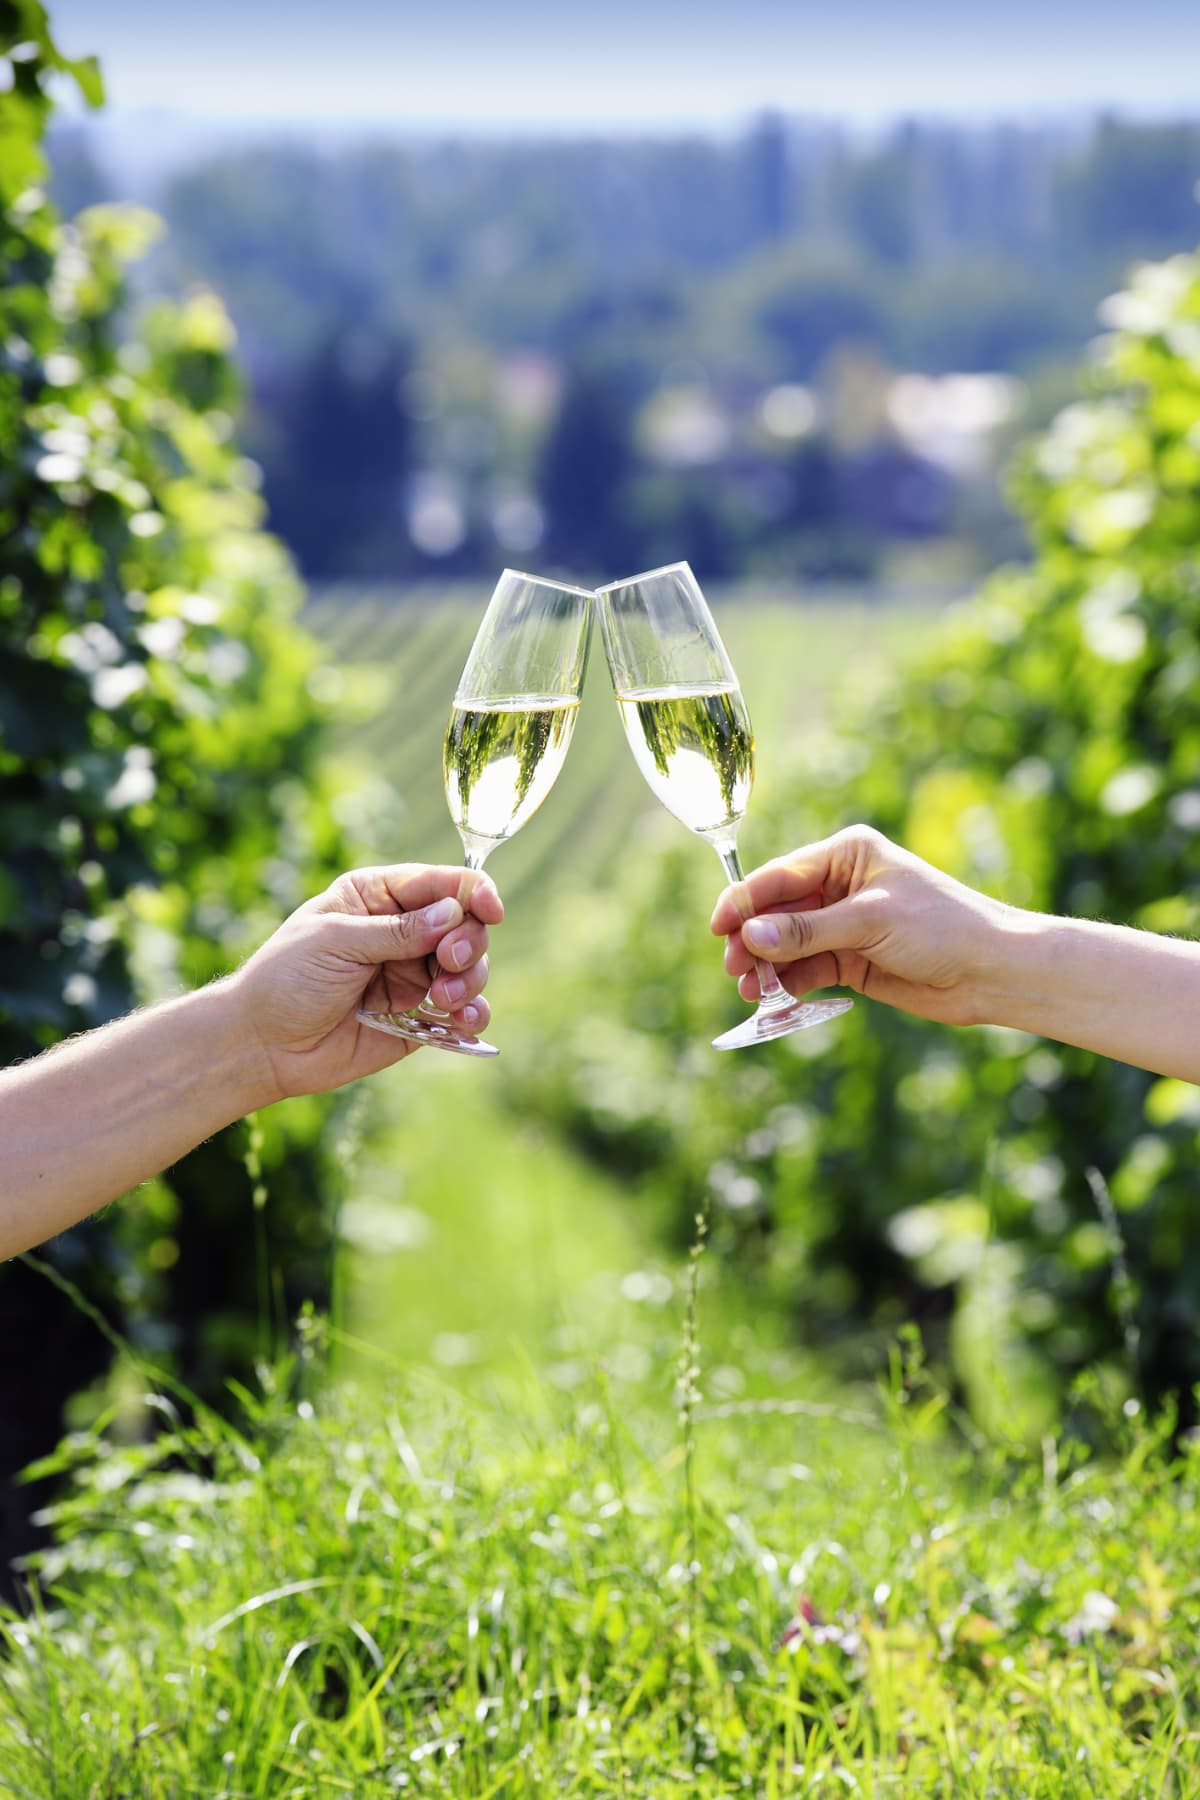 Two hands toasting with wine glasses in front of a vineyard.